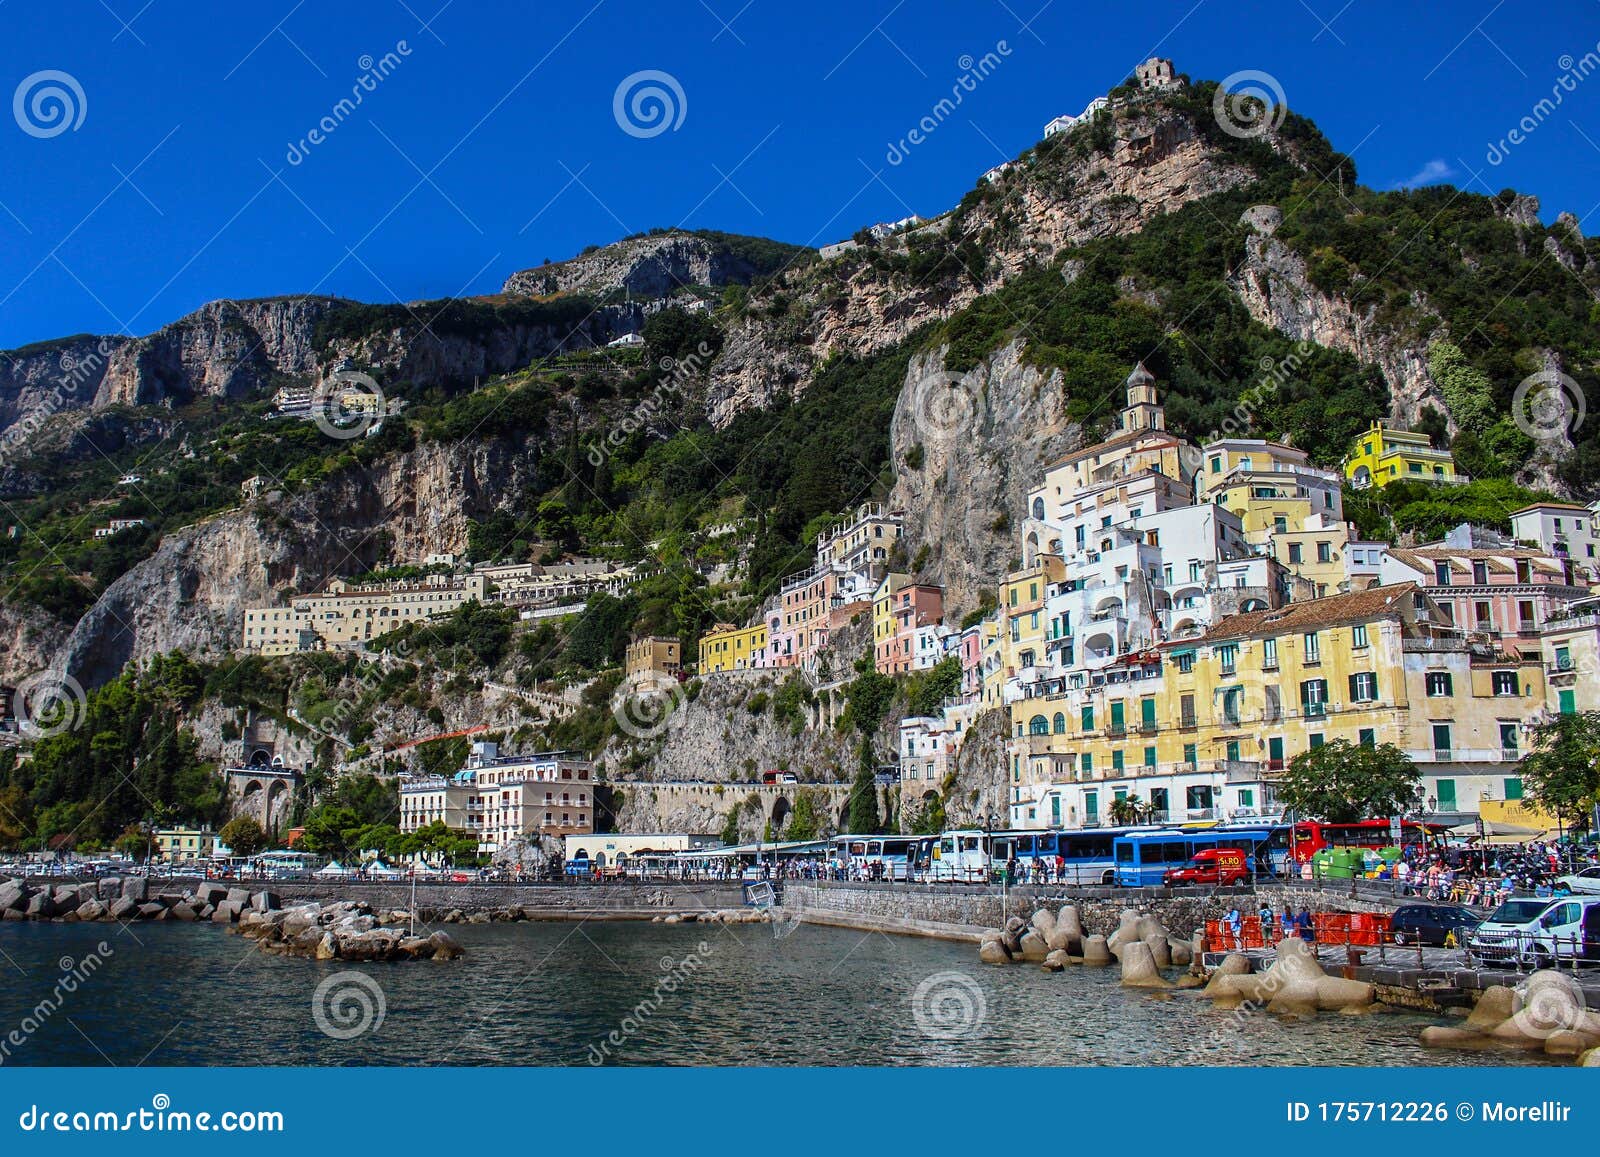 View of the City of Amalfi from the Jetty with Parked Buses, the Sea ...